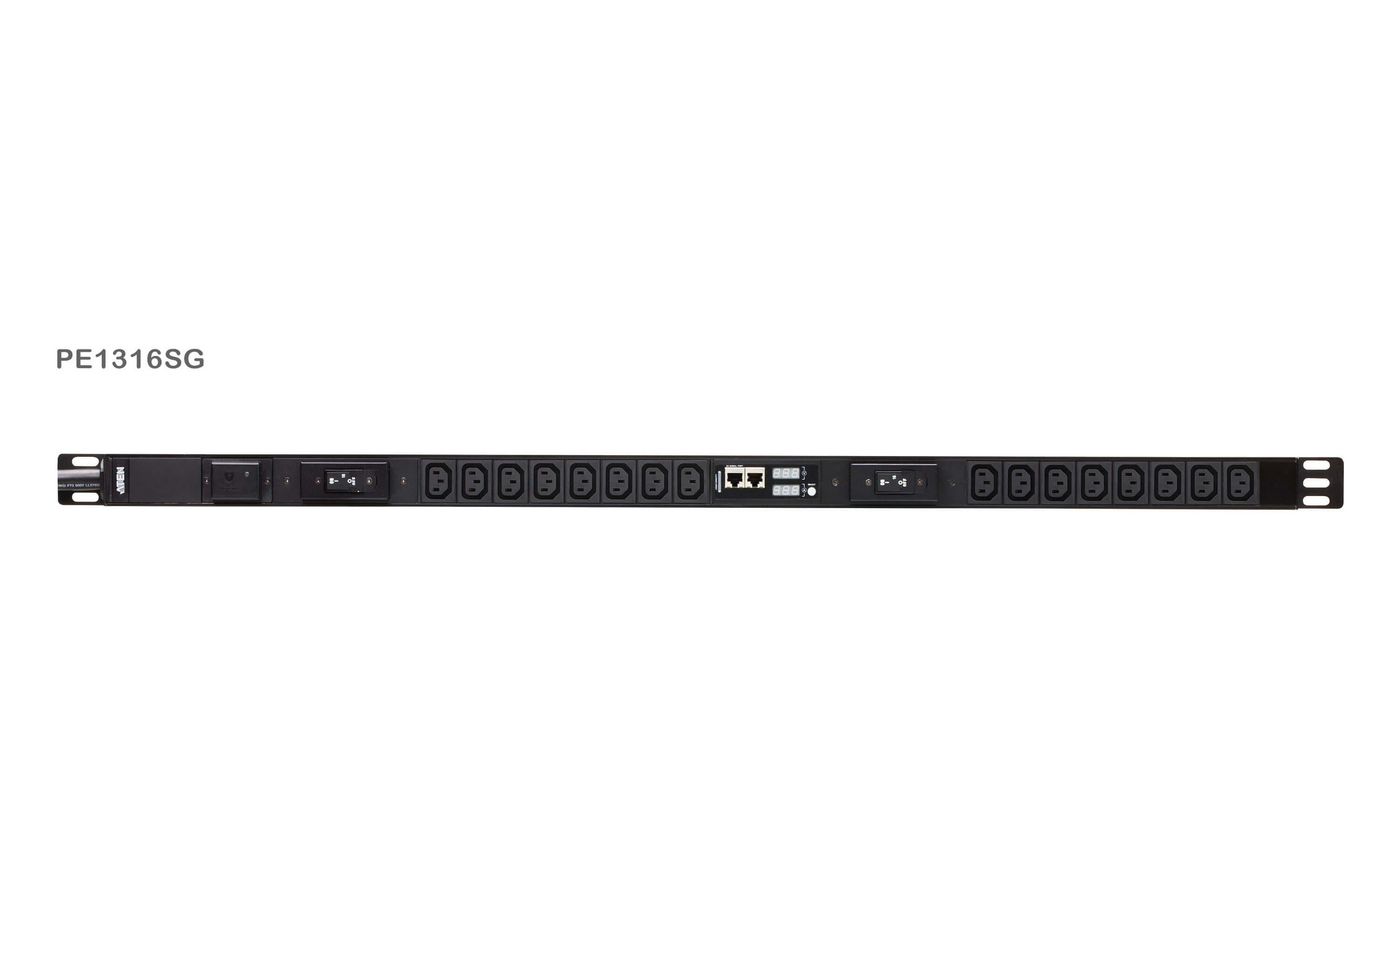 Aten PE1316SG-AT W127285140 16-Outlet 0U PDU with Current 